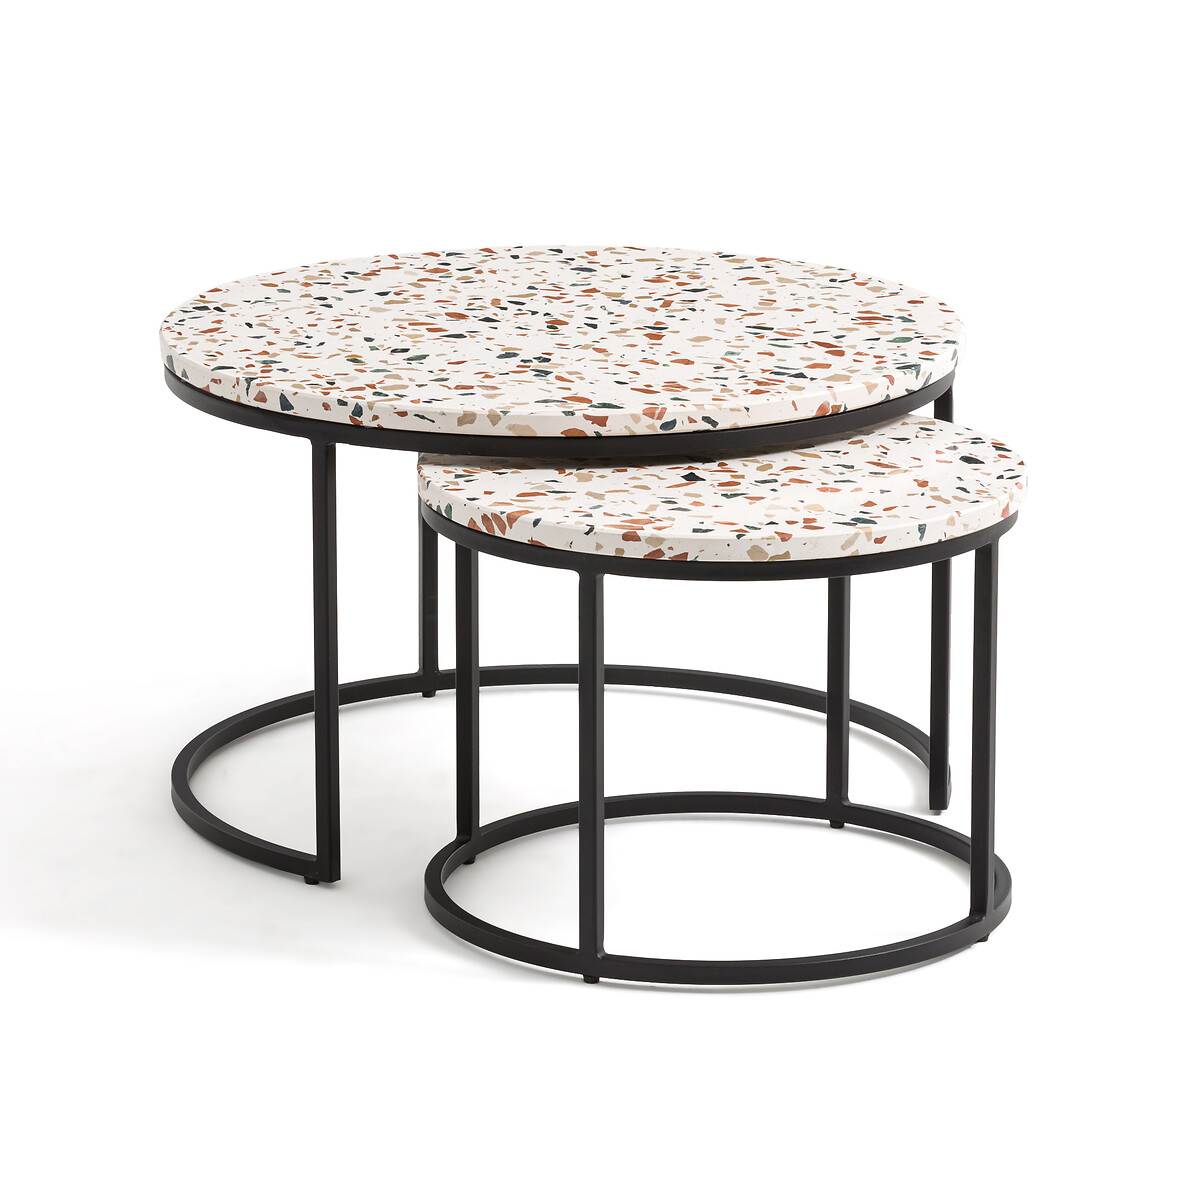 Set of 2 Herve Terrazzo and Metal Round Nesting Tables